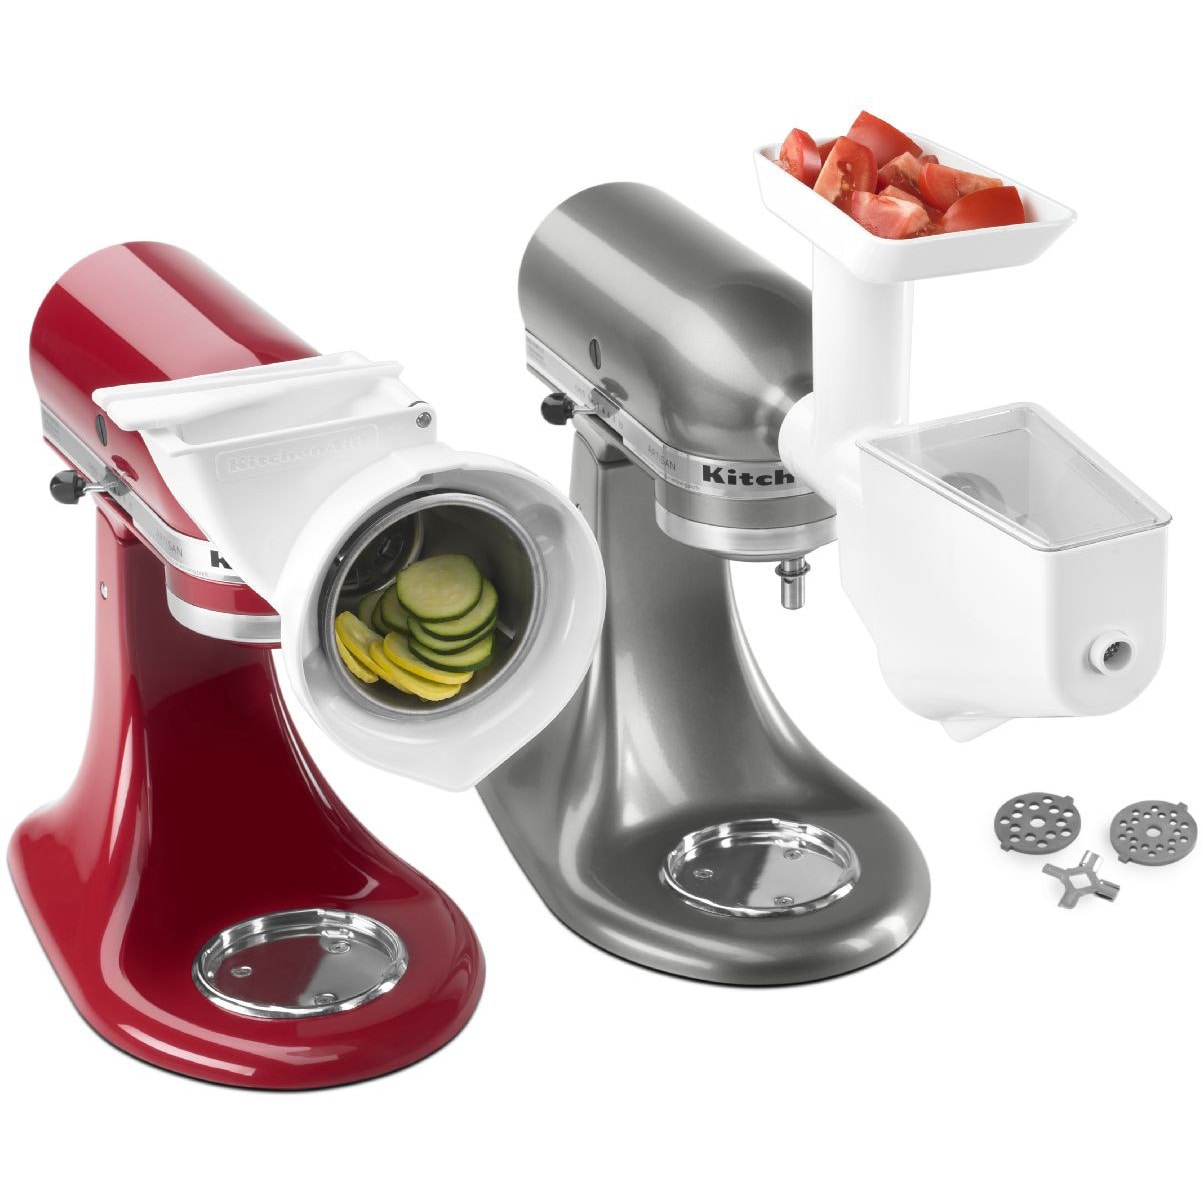 https://ak1.ostkcdn.com/images/products/4491708/KitchenAid-FPPA-Mixer-Attachment-Pack-for-Stand-Mixers-37dbc90c-d654-42ea-805c-148c77eaa13f.jpg